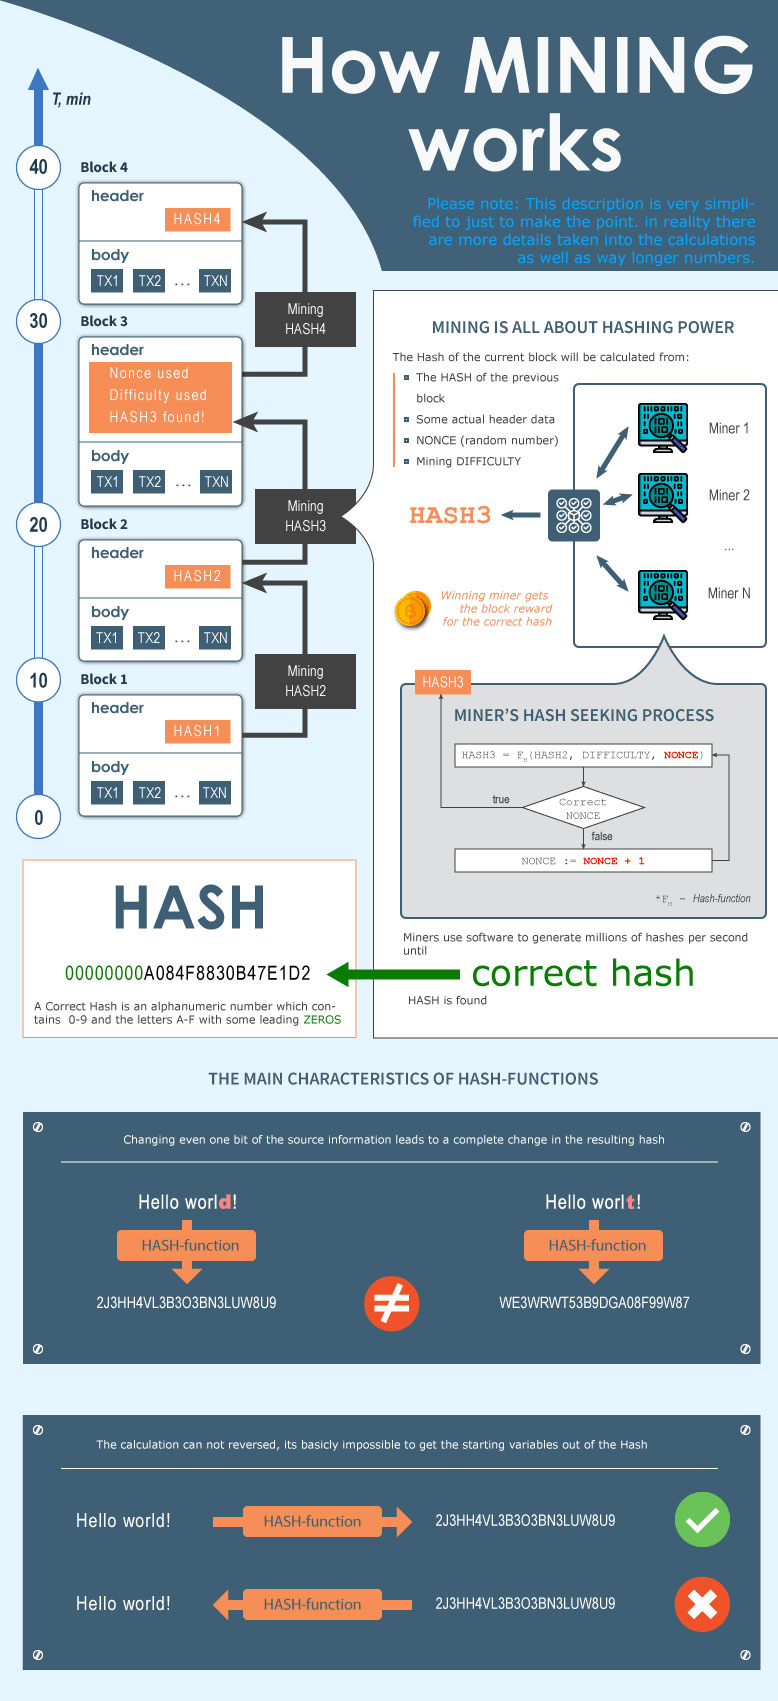 An infographic showing how crypto mining works